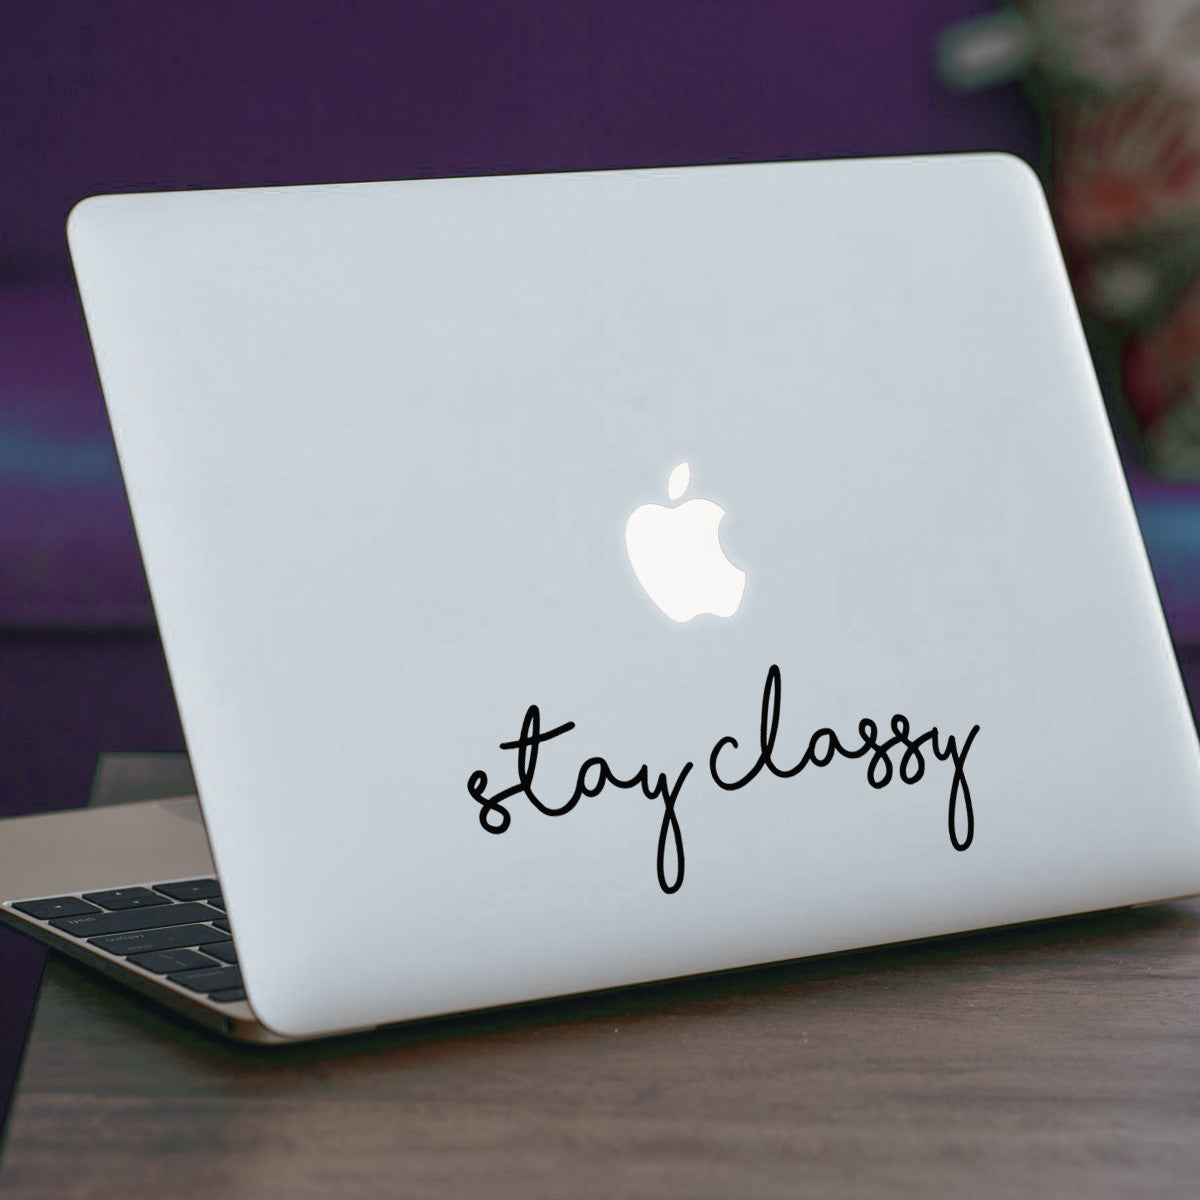 Stay Classy Macbook Decal (Type 2)